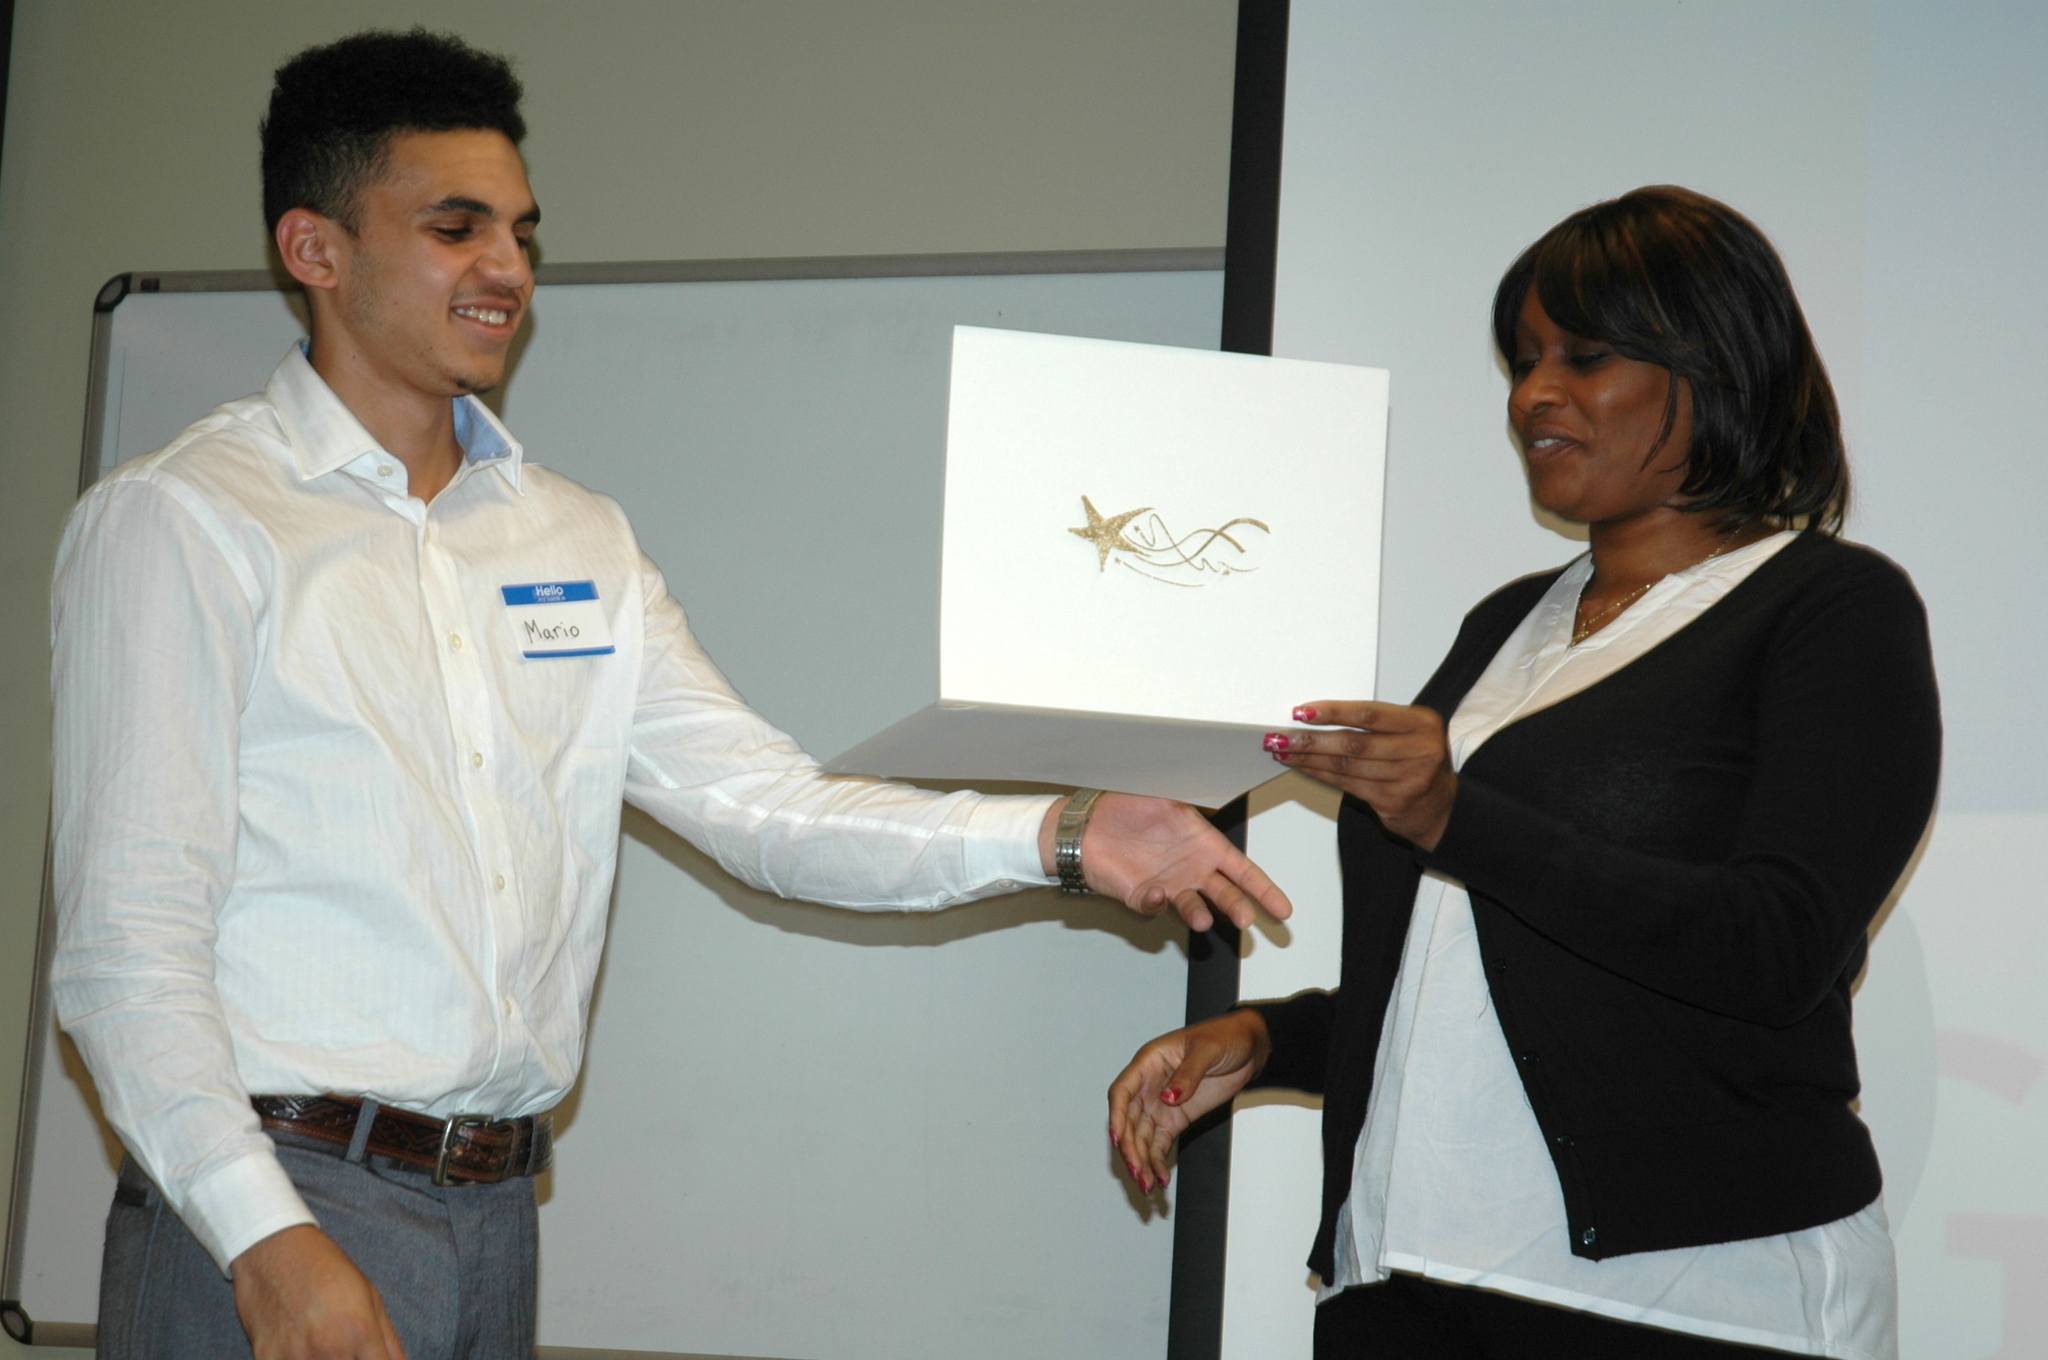 Kirk Boxleitner/Staff PhotoMarysville Goodwill Youth Aerospace Program graduate Mario Senter receives a special recognition certificate from Monique Edwards